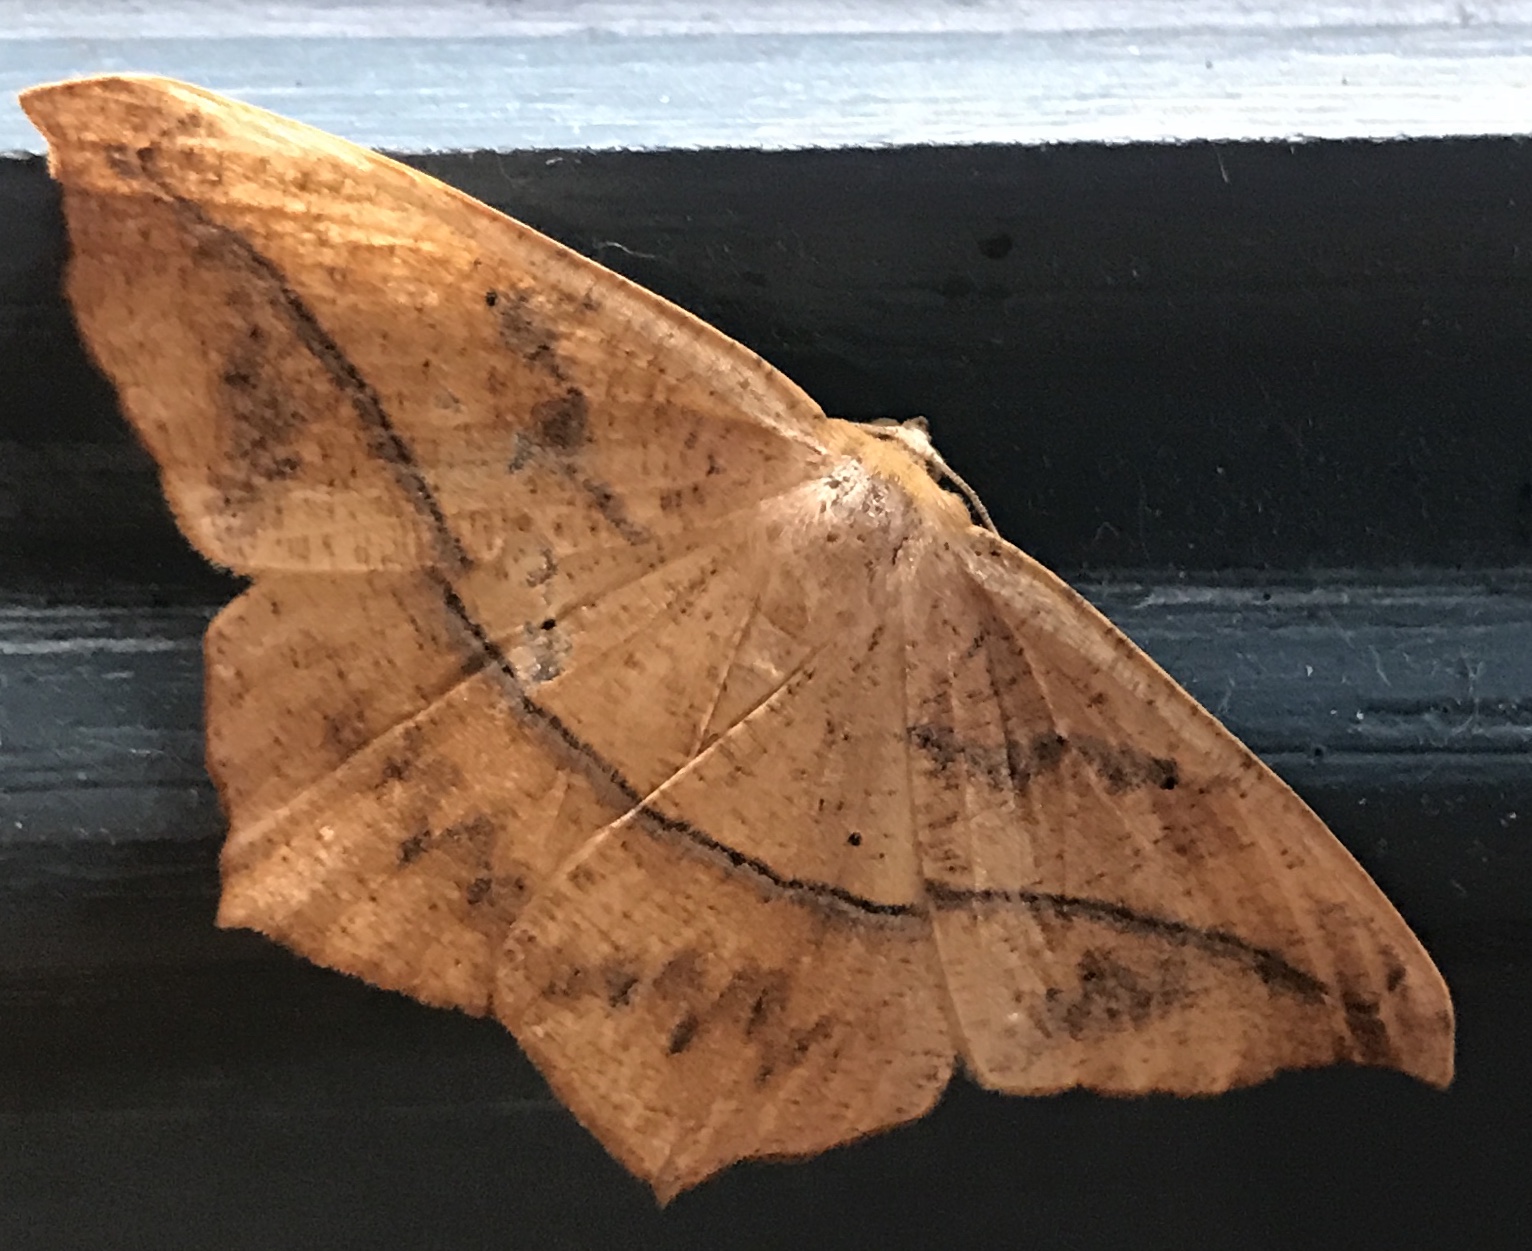 Brown moth with one dark band across wings.